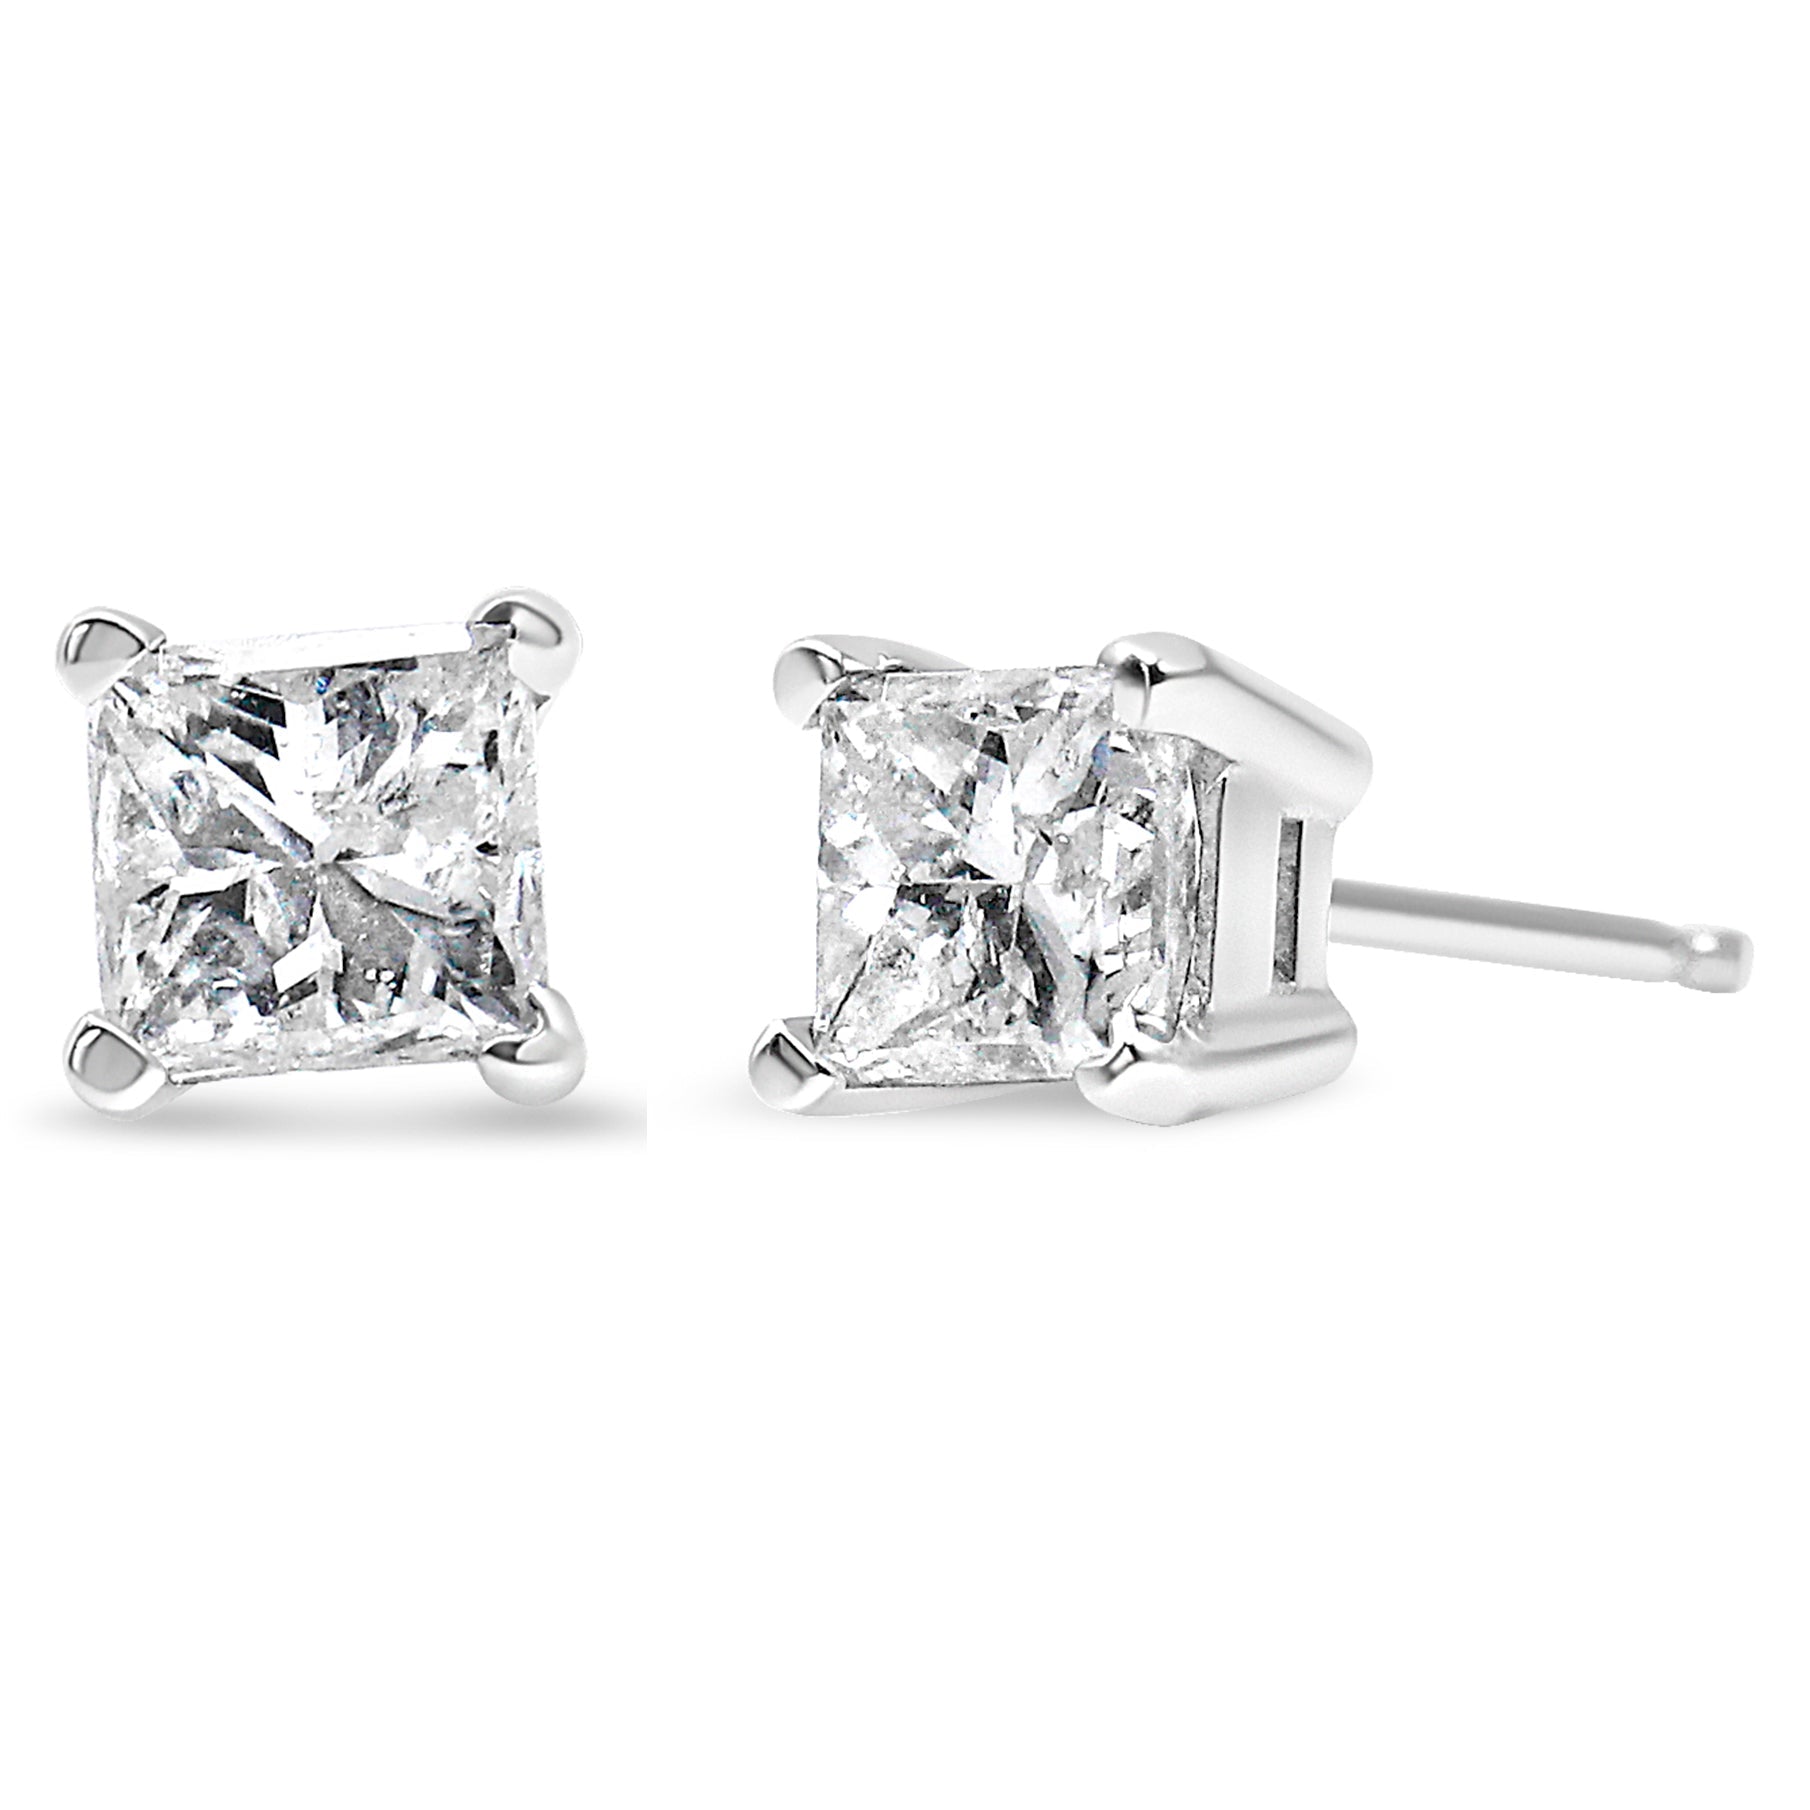 AGS Certified 14k White Gold 1/4 cttw 4-Prong Set Princess-Cut Solitaire Diamond Push Back Stud Earrings (I-J Color, SI2-I1 Clarity) - LinkagejewelrydesignLinkagejewelrydesign